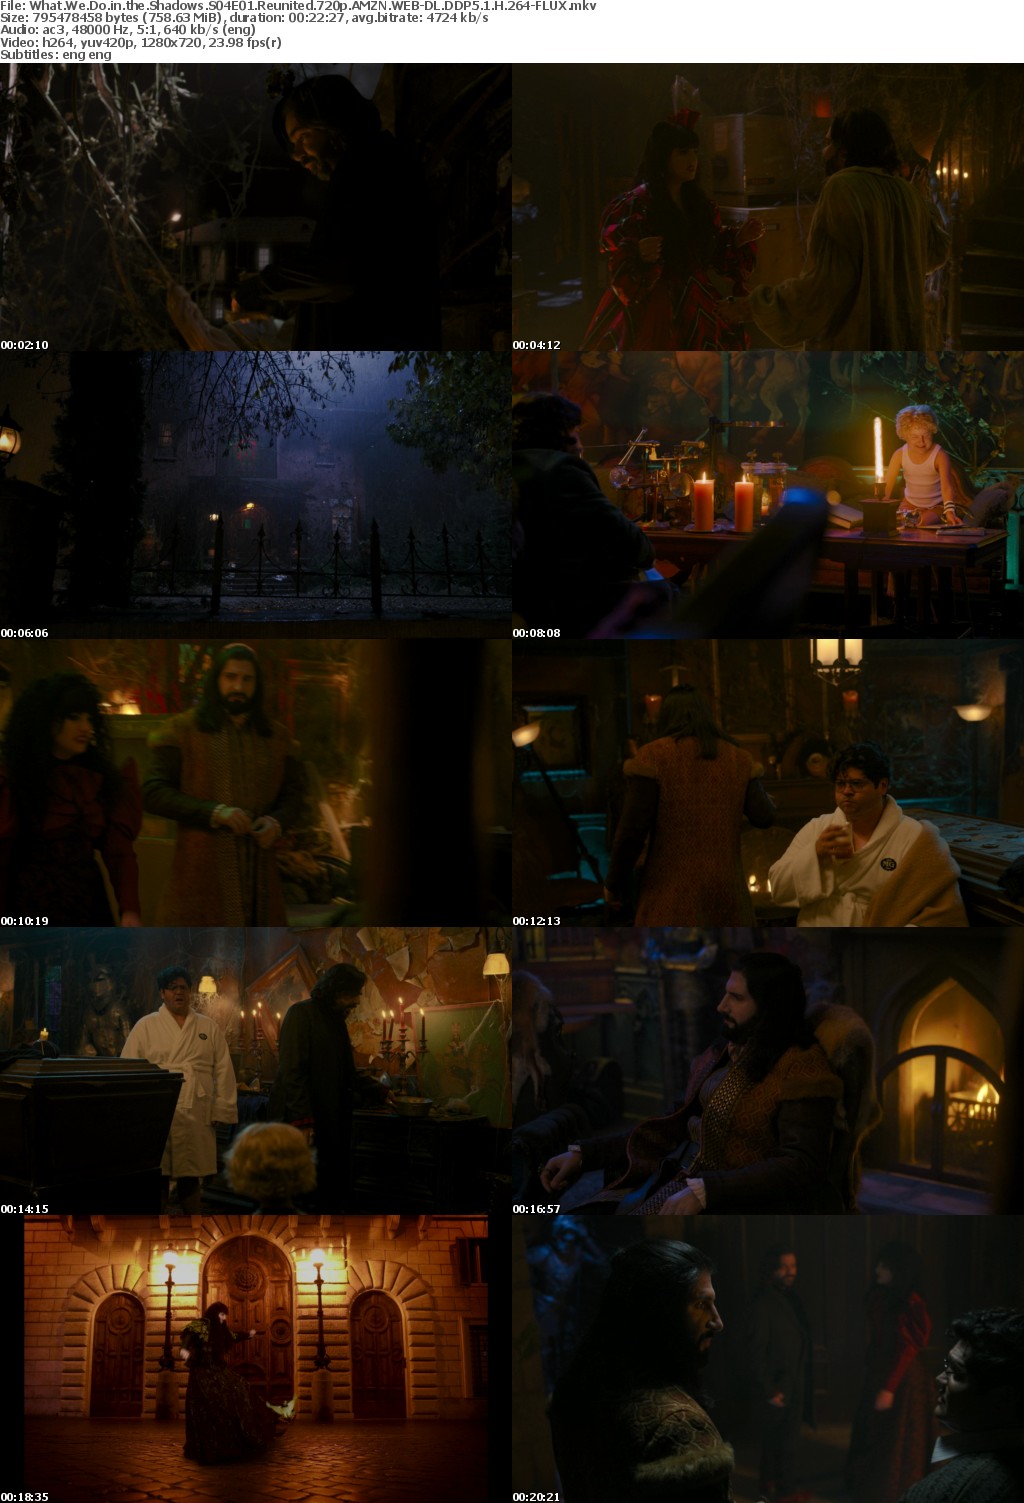 What We Do in the Shadows S04E01 Reunited 720p AMZN WEBRip DDP5 1 x264-FLUX